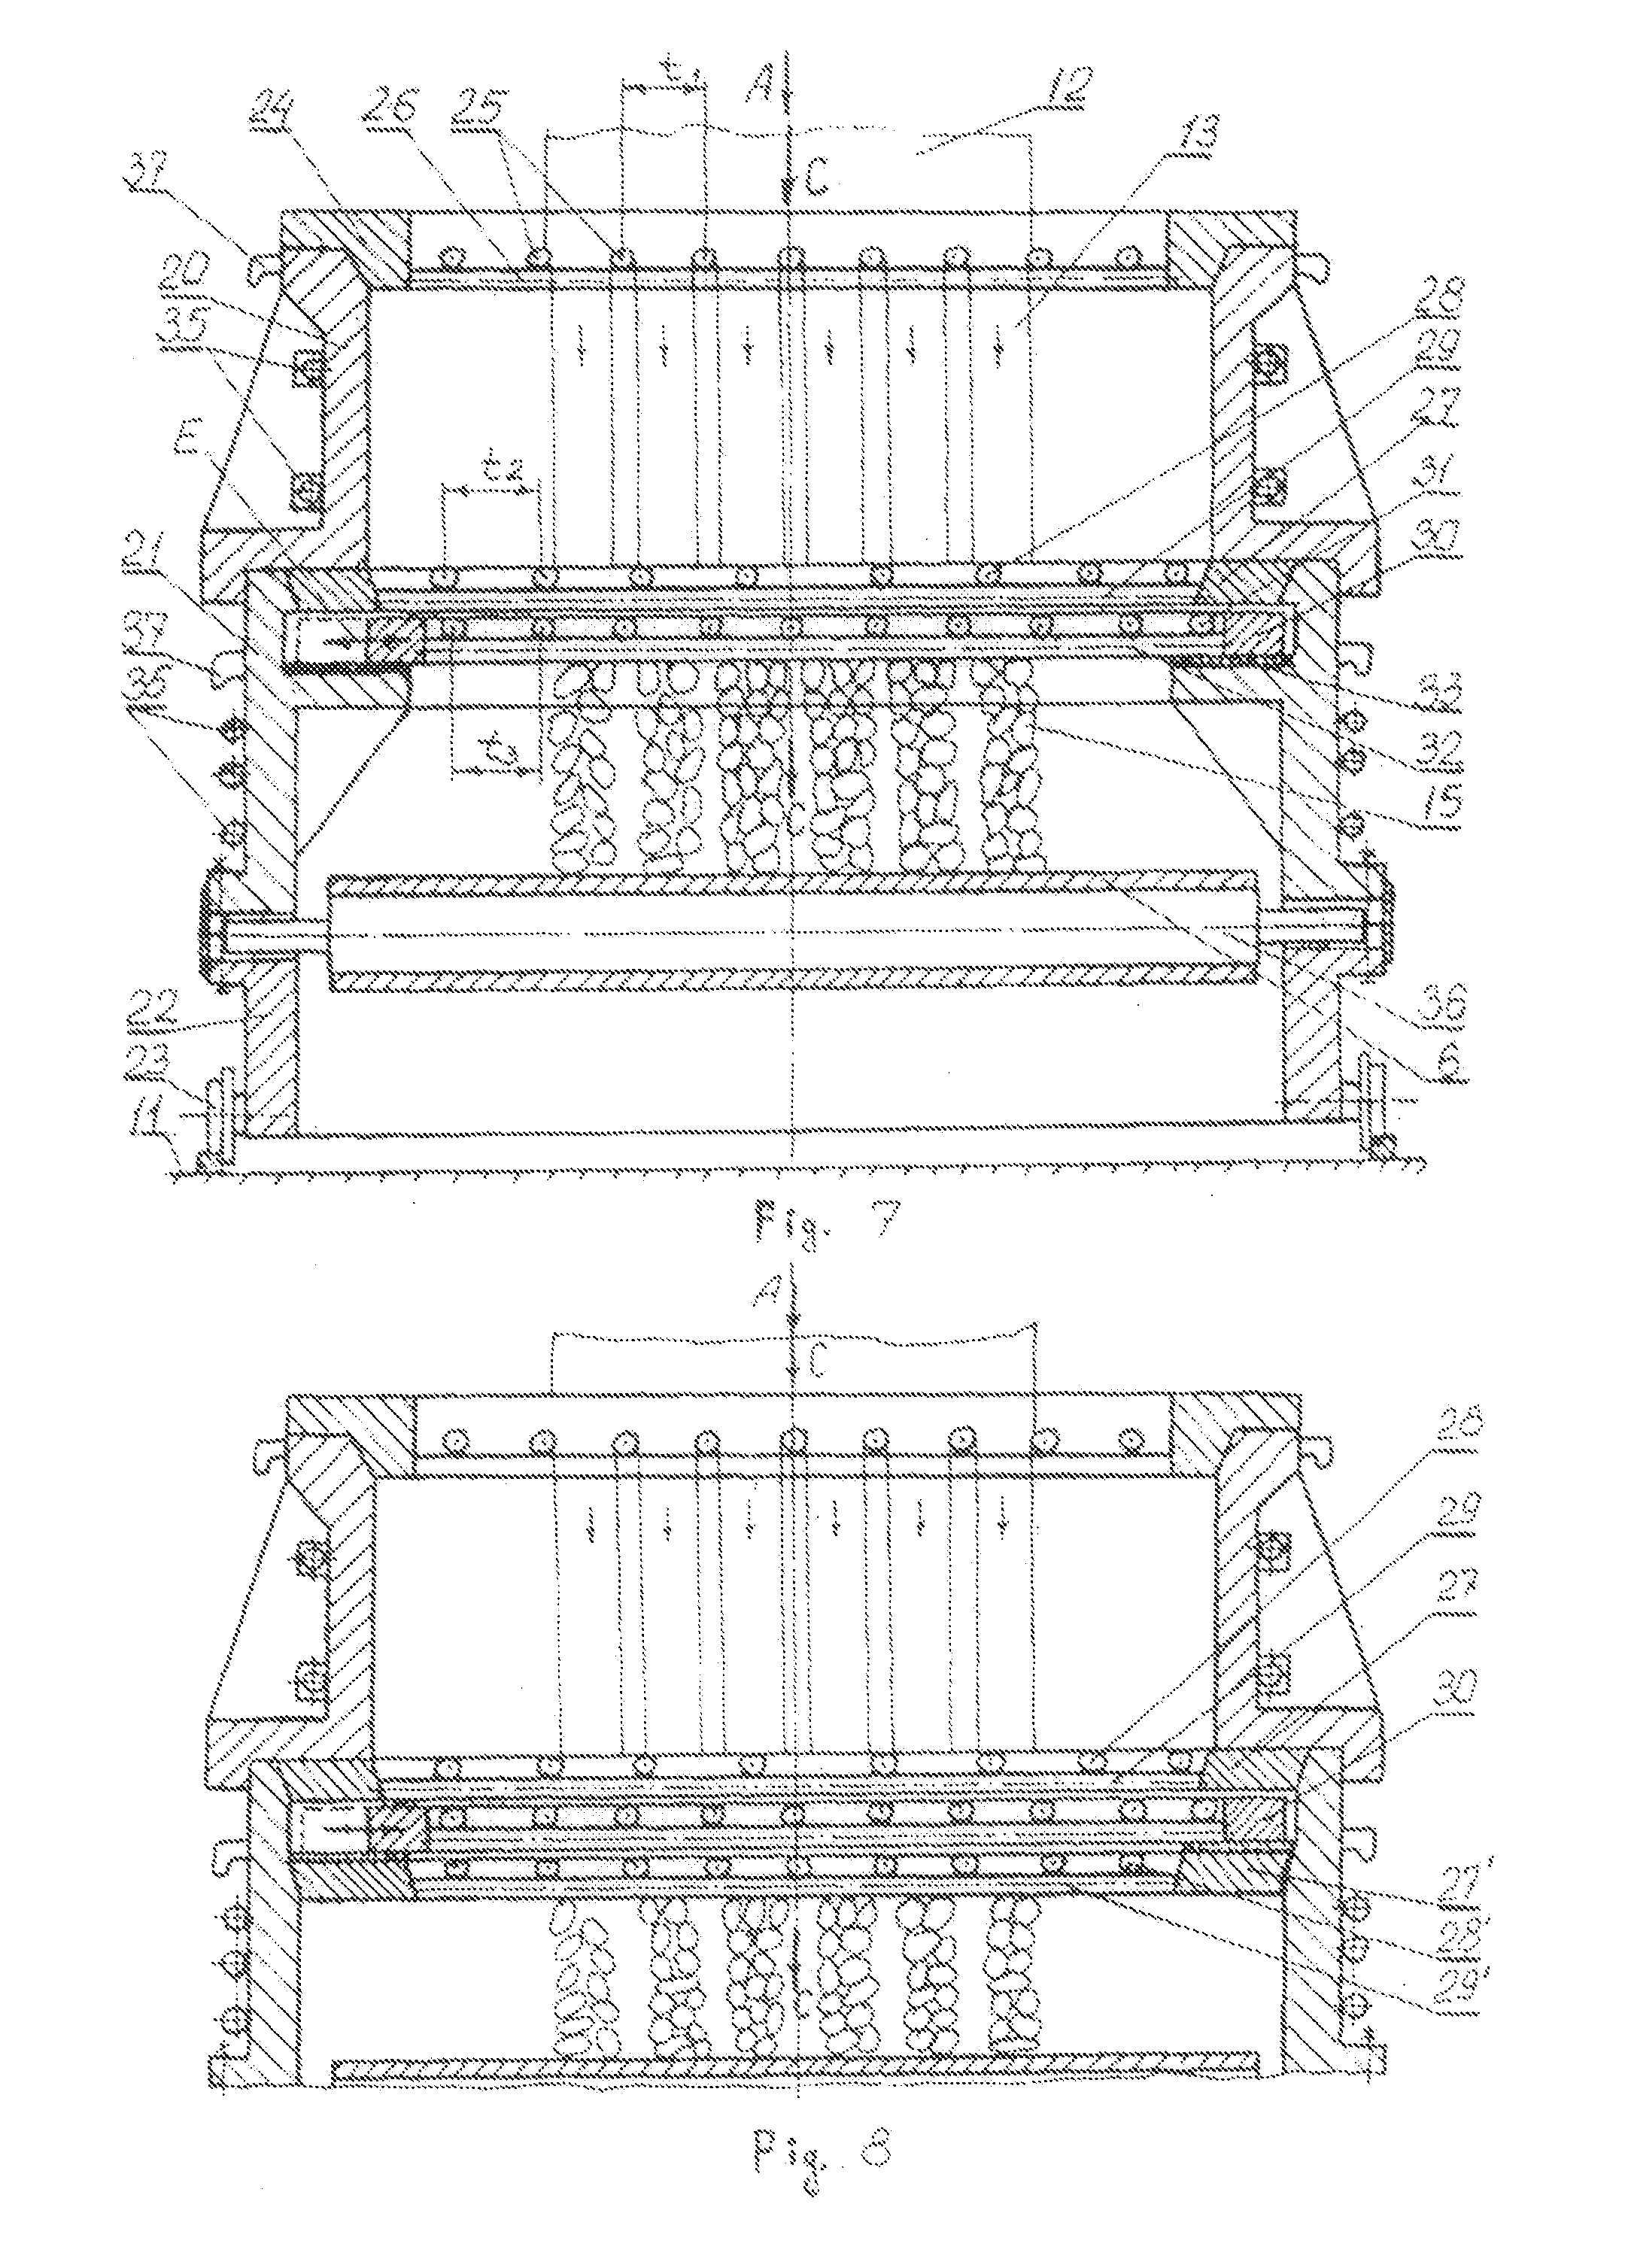 Method for treating slag flowing from a metallurgical vessel and a device for carrying out said method